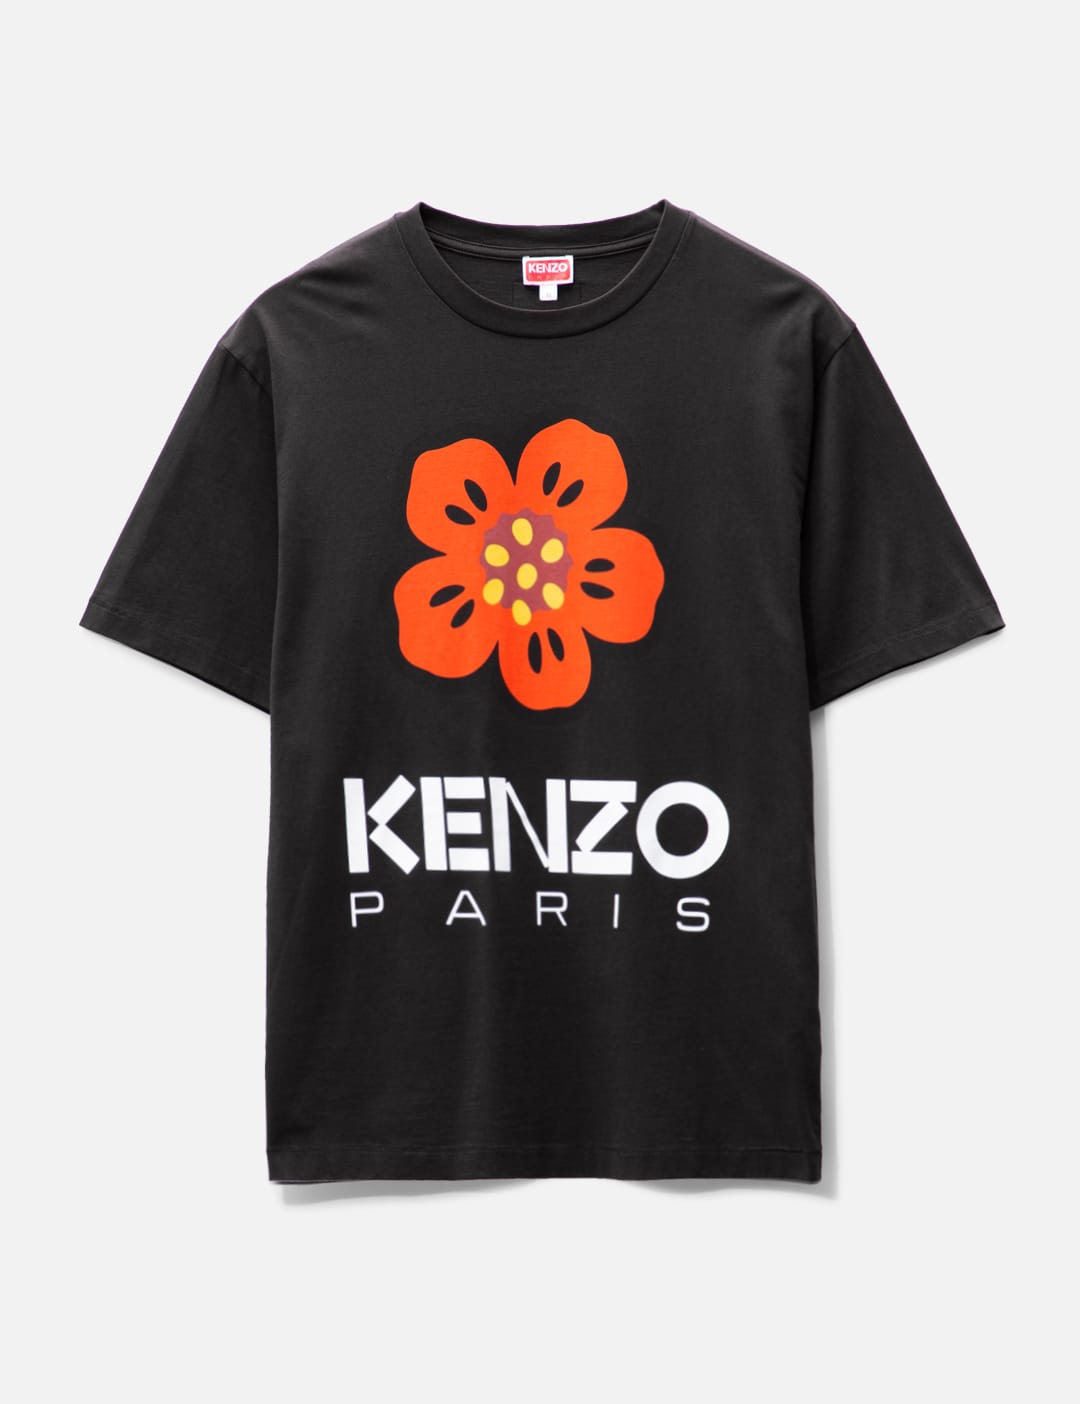 Kenzo - 'BOKE FLOWER' T-SHIRT | HBX - Globally Curated Fashion and